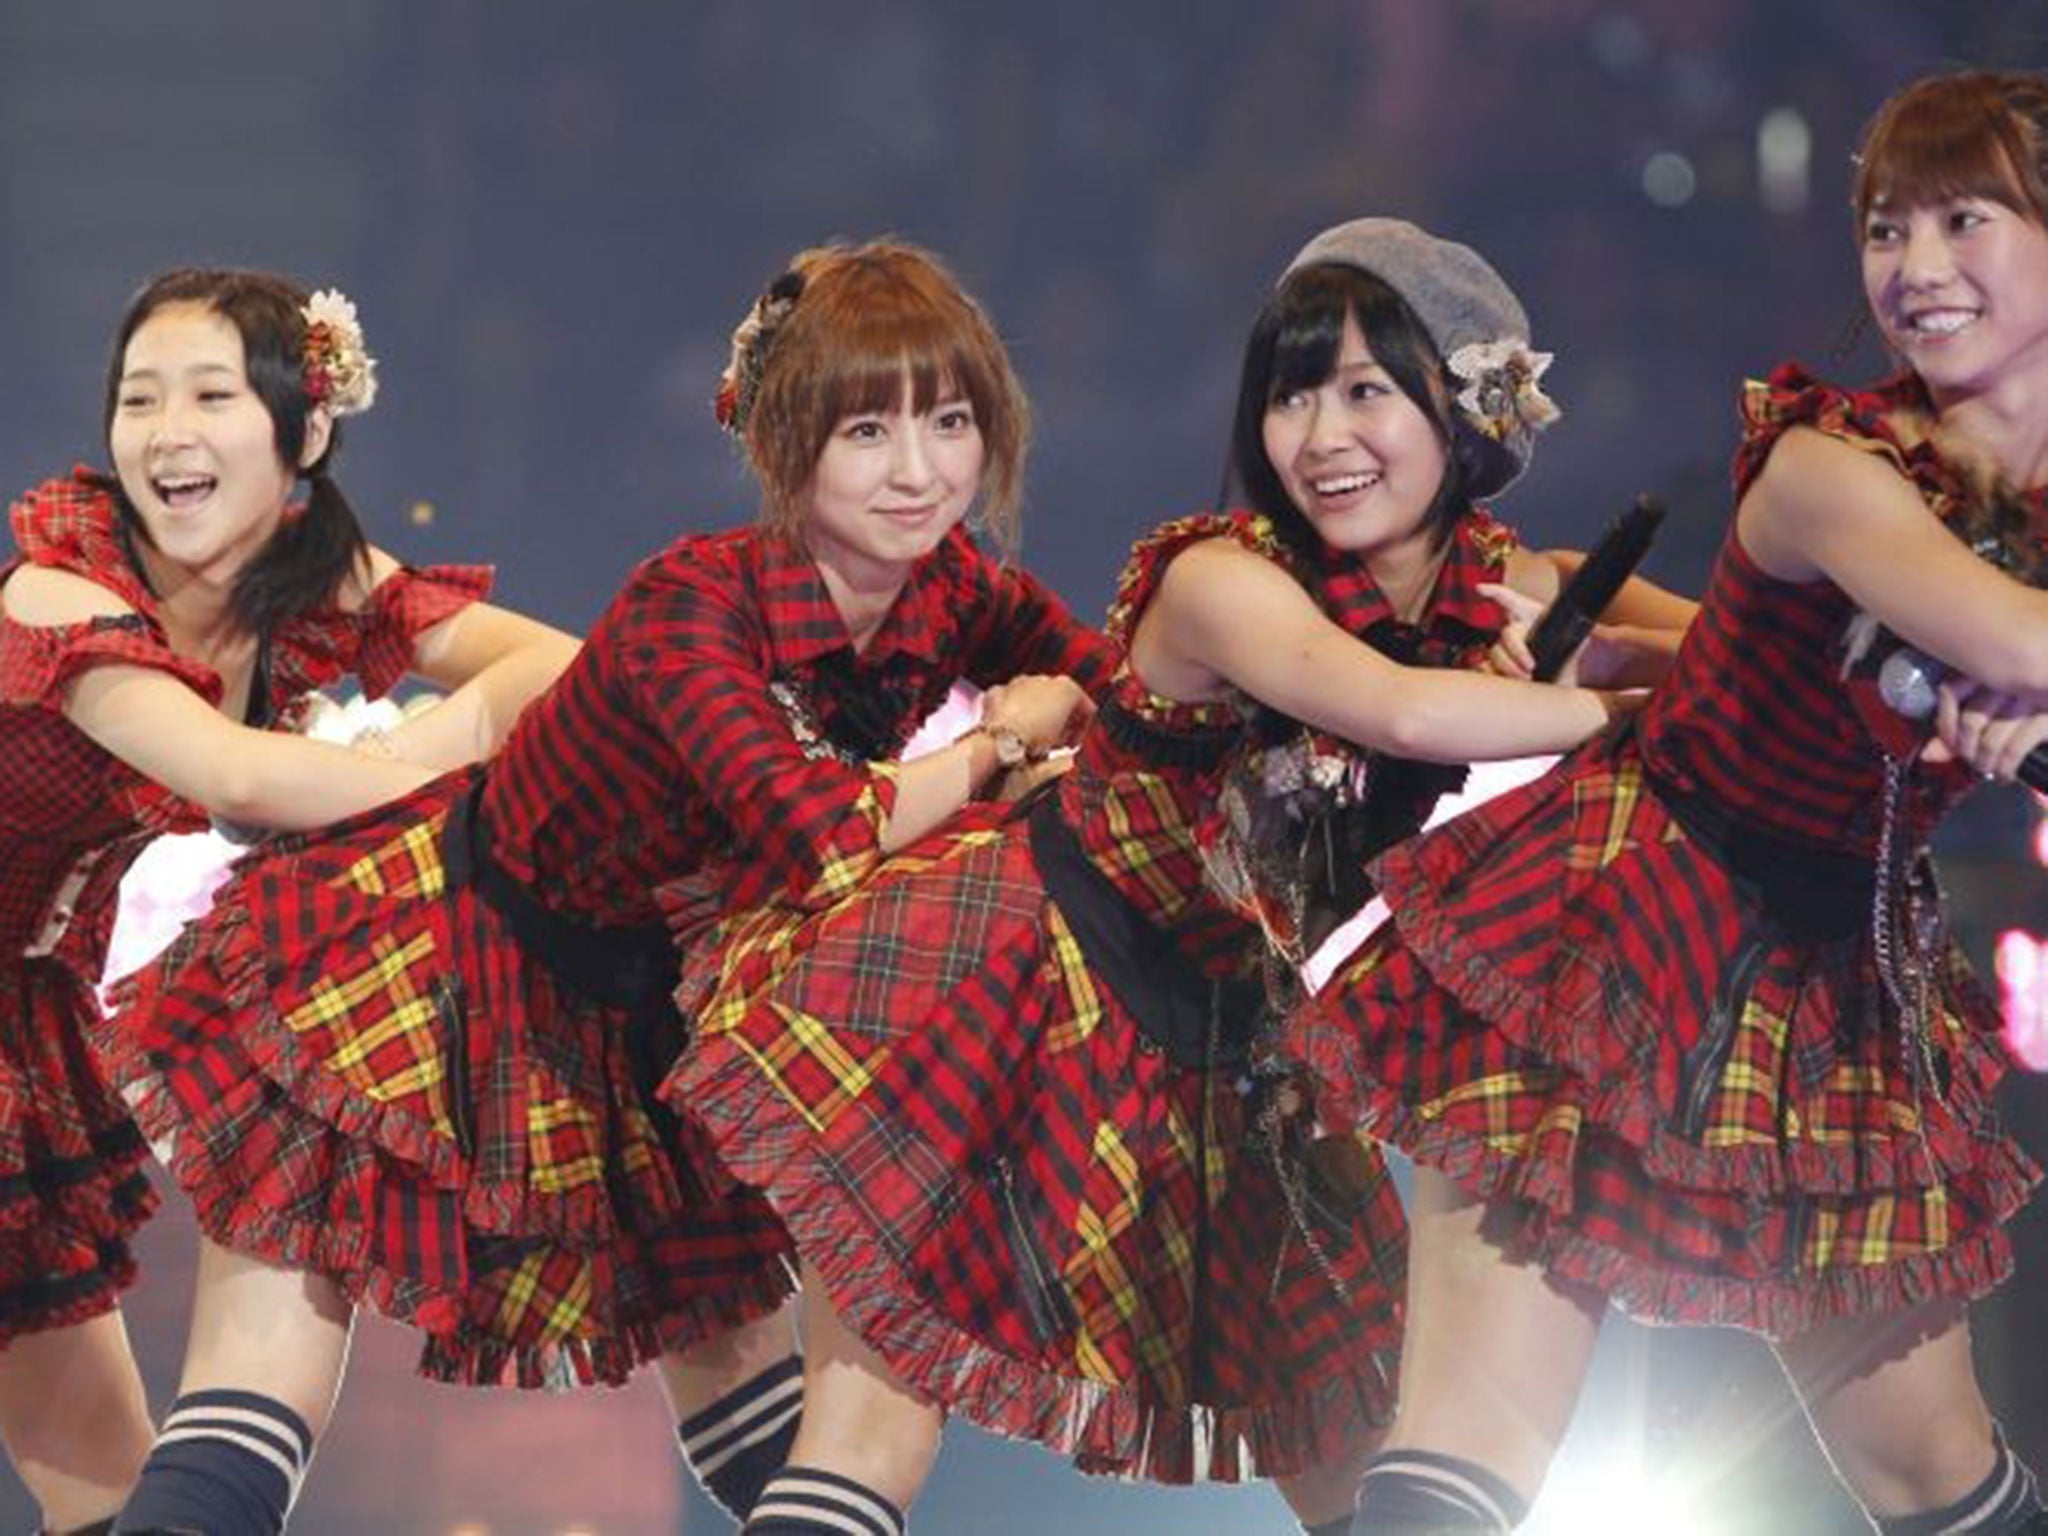 AKB48 perform during one of their daily concerts at Tokyo’s Akihabara theatre